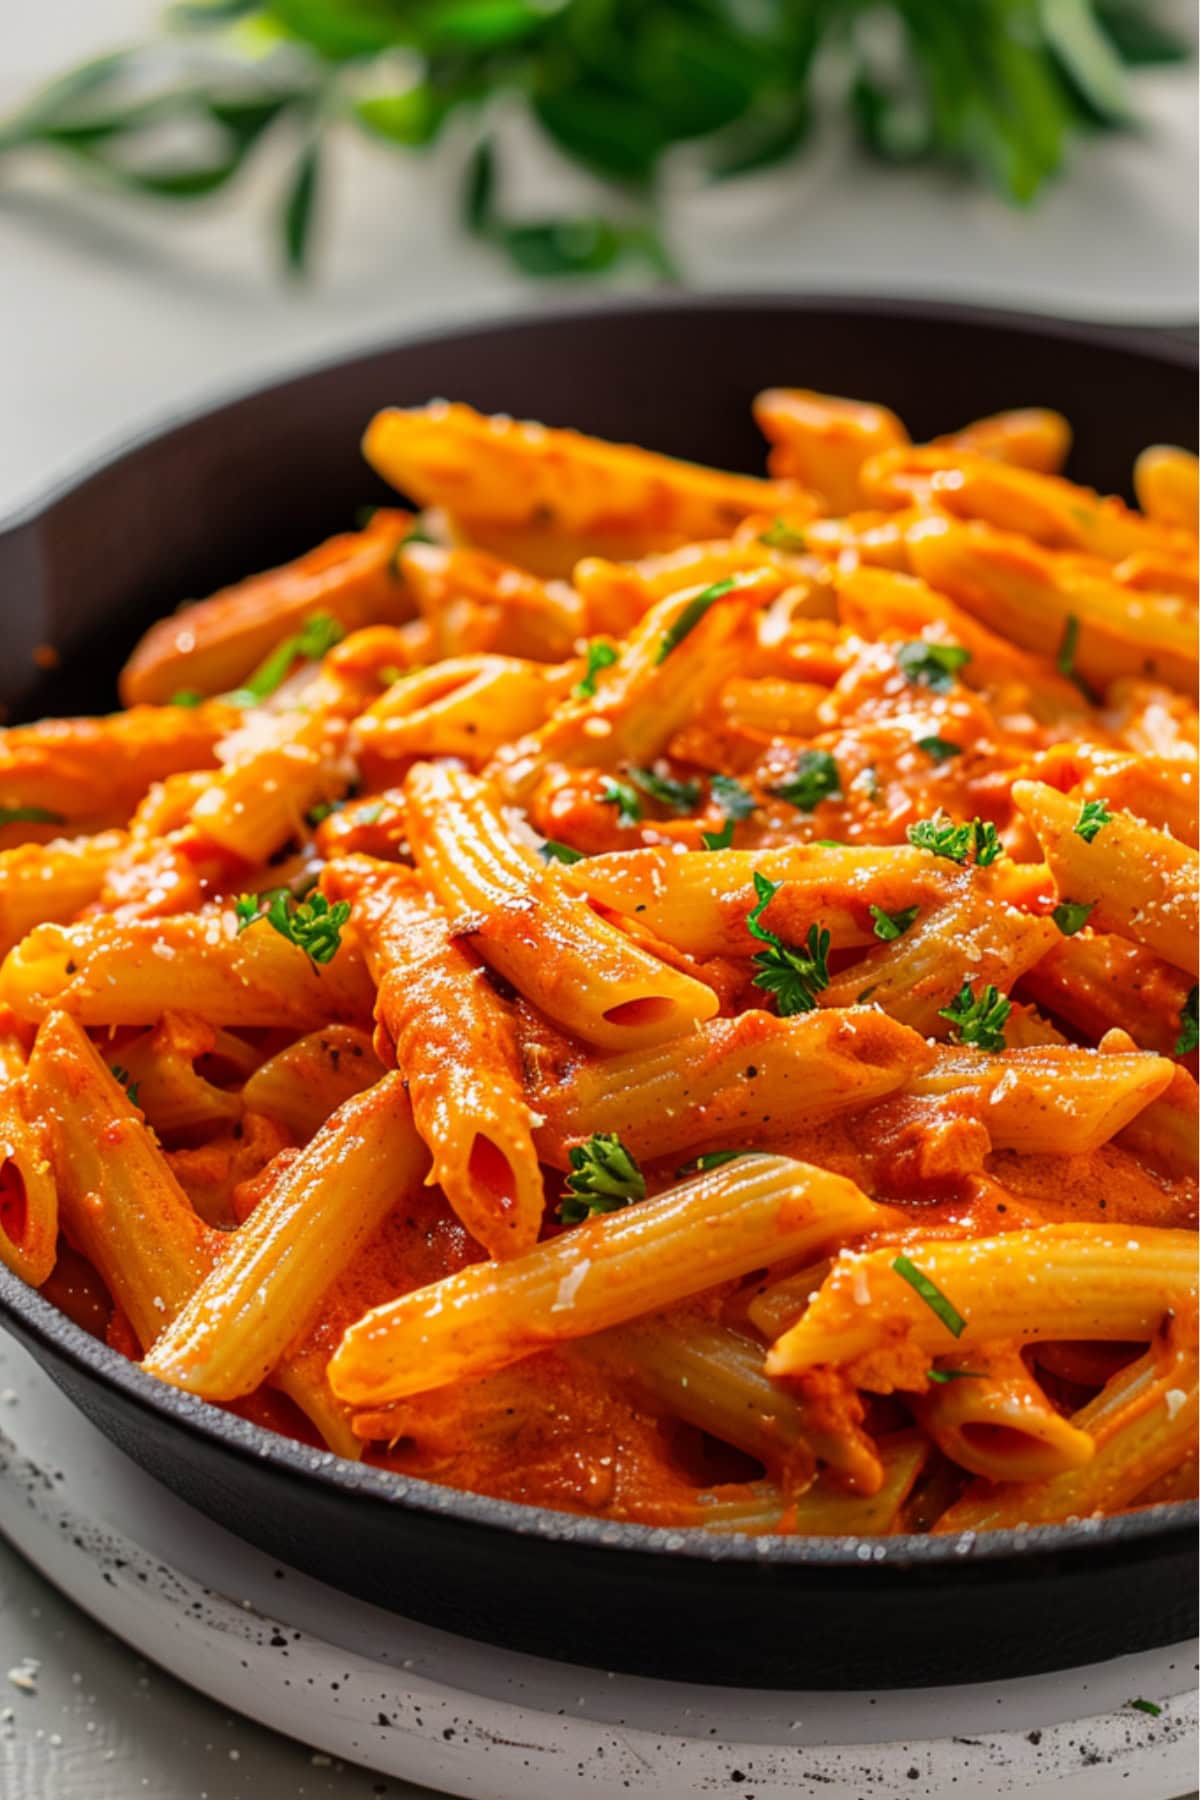 Roasted red pepper pasta tossed in cast iron skillet pan.